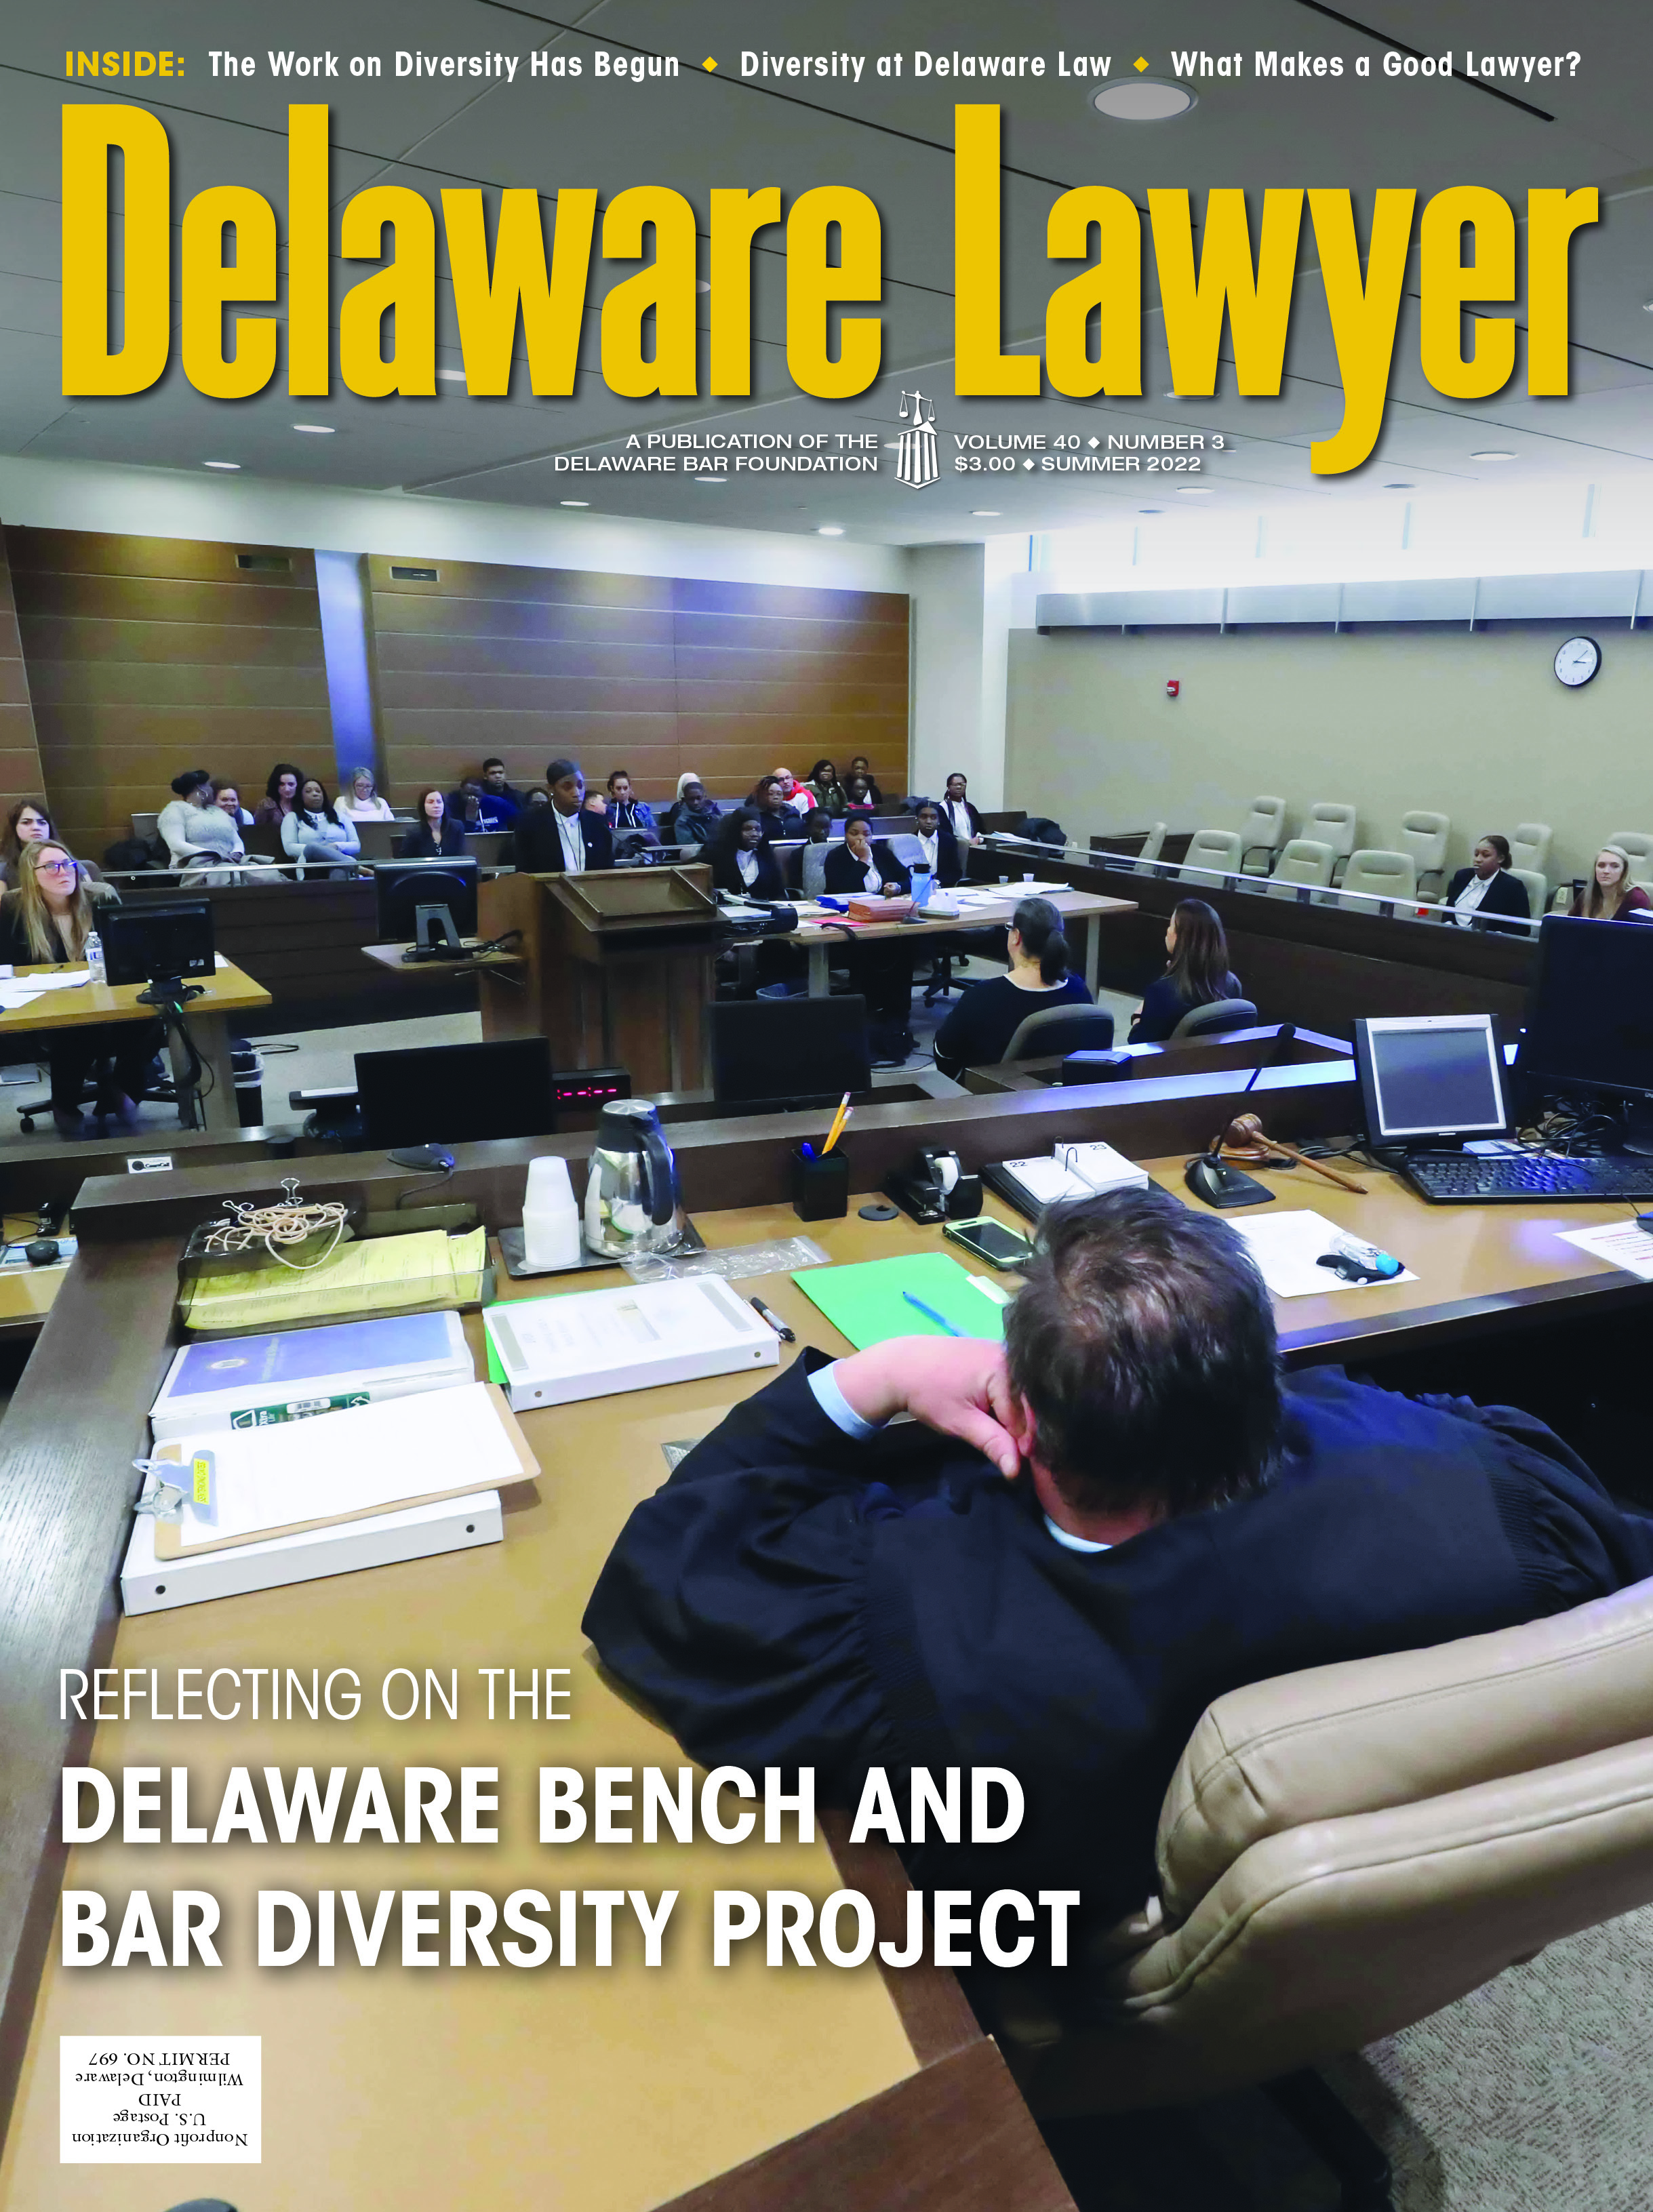 Reflecting on the Delaware Bench and Bar Diversity Project